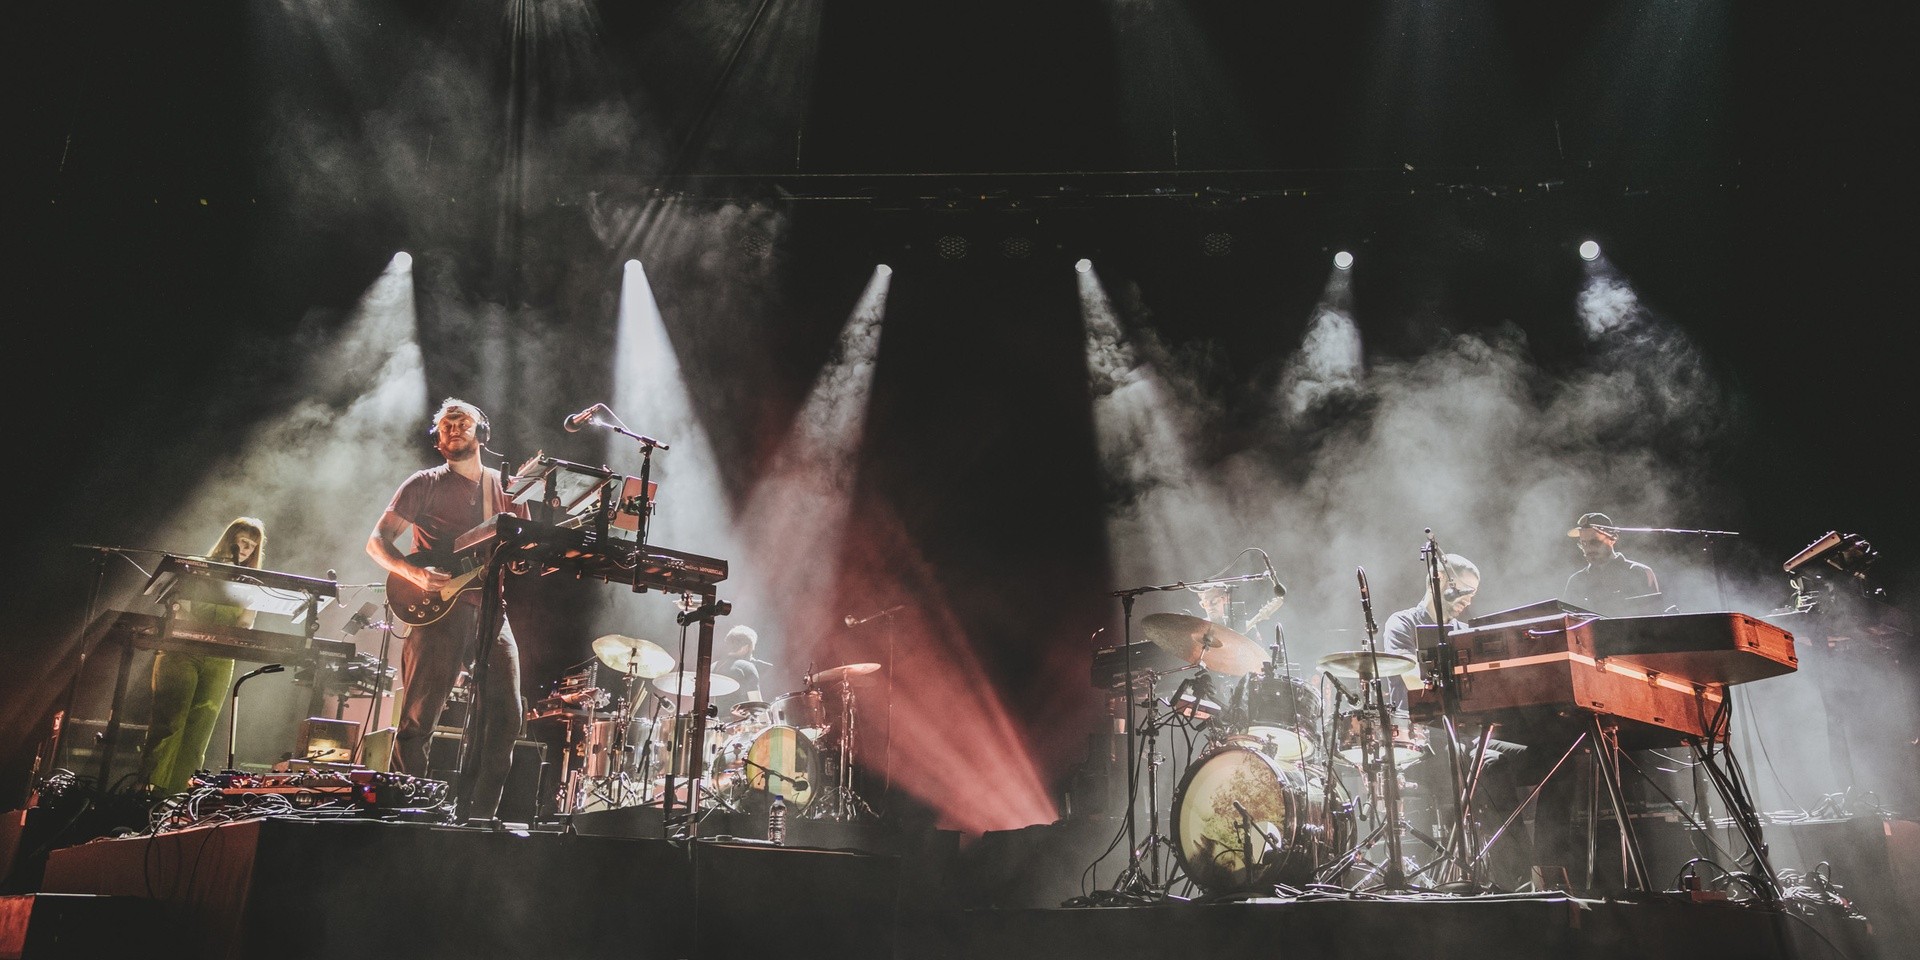 Bon Iver returns to Singapore with new songs (and a fresher approach) – Gig report
